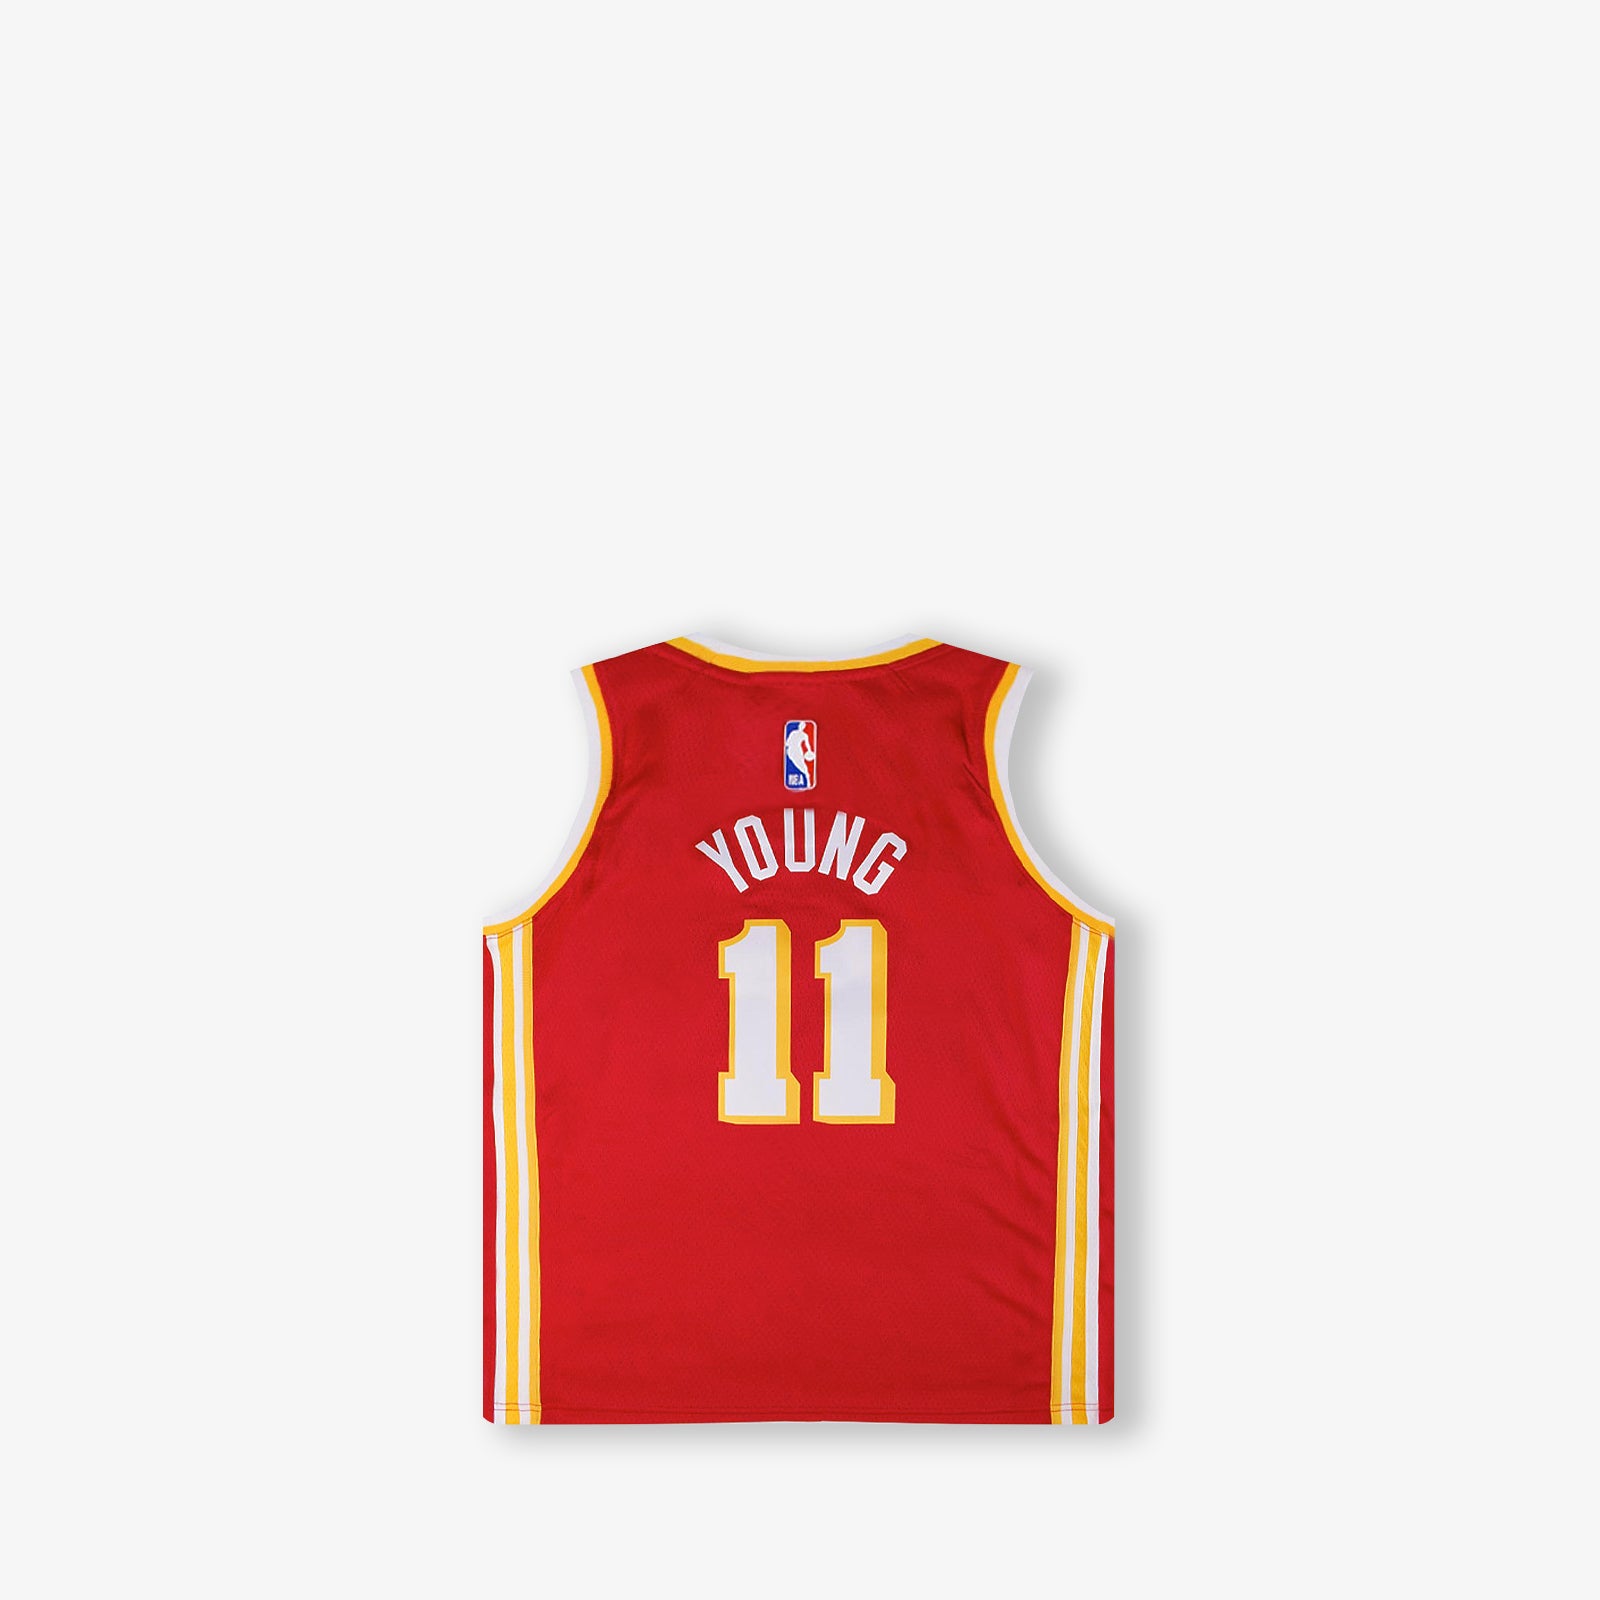 throwback trae young jersey